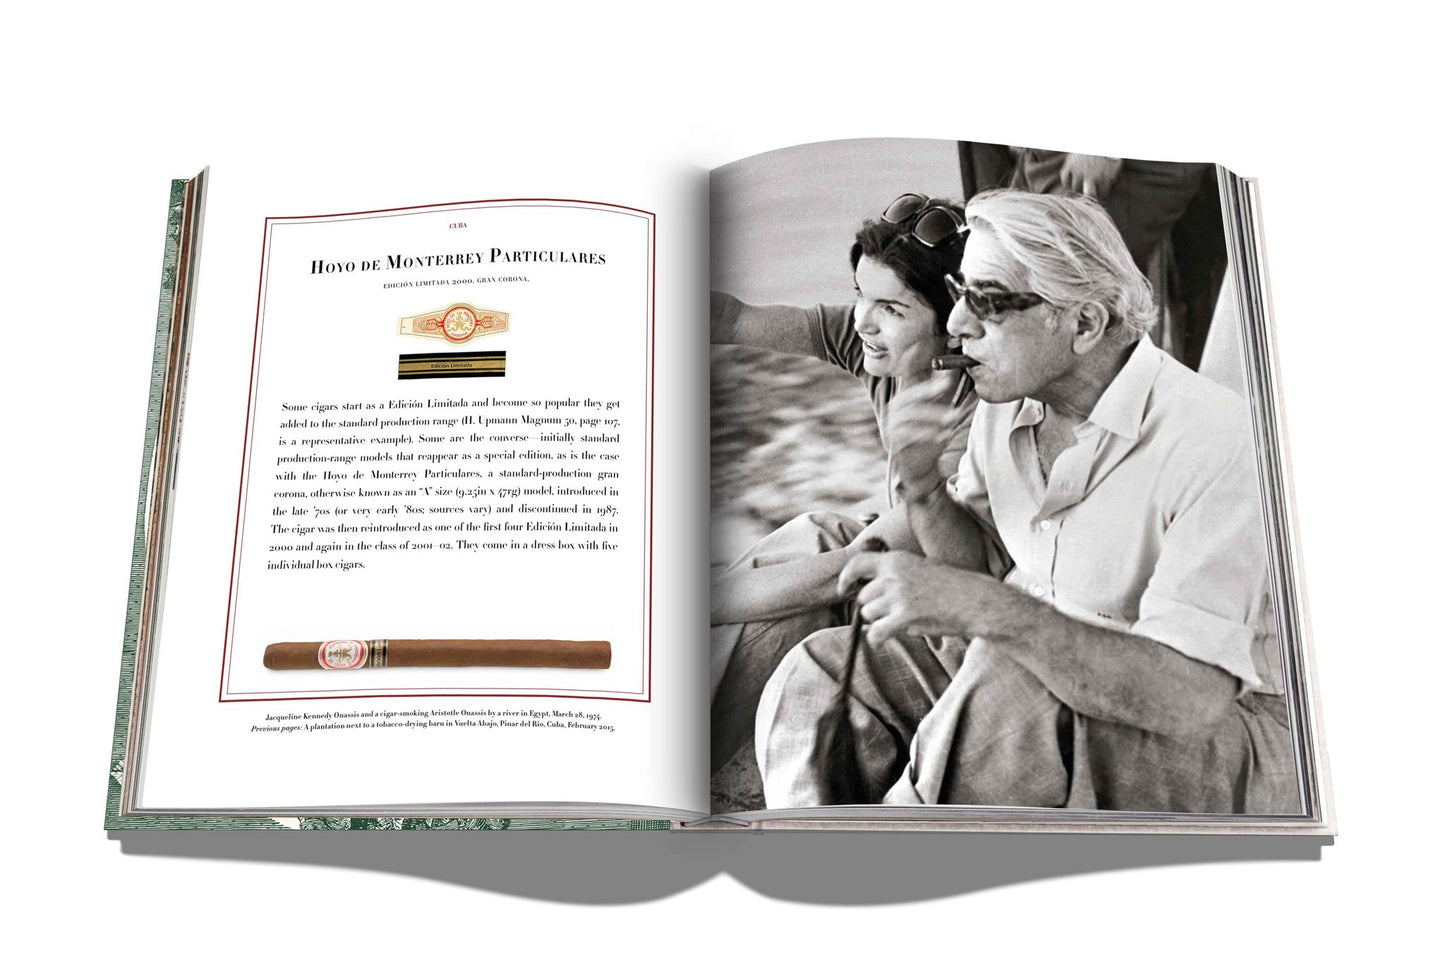 Book Cigars: Impossible collection